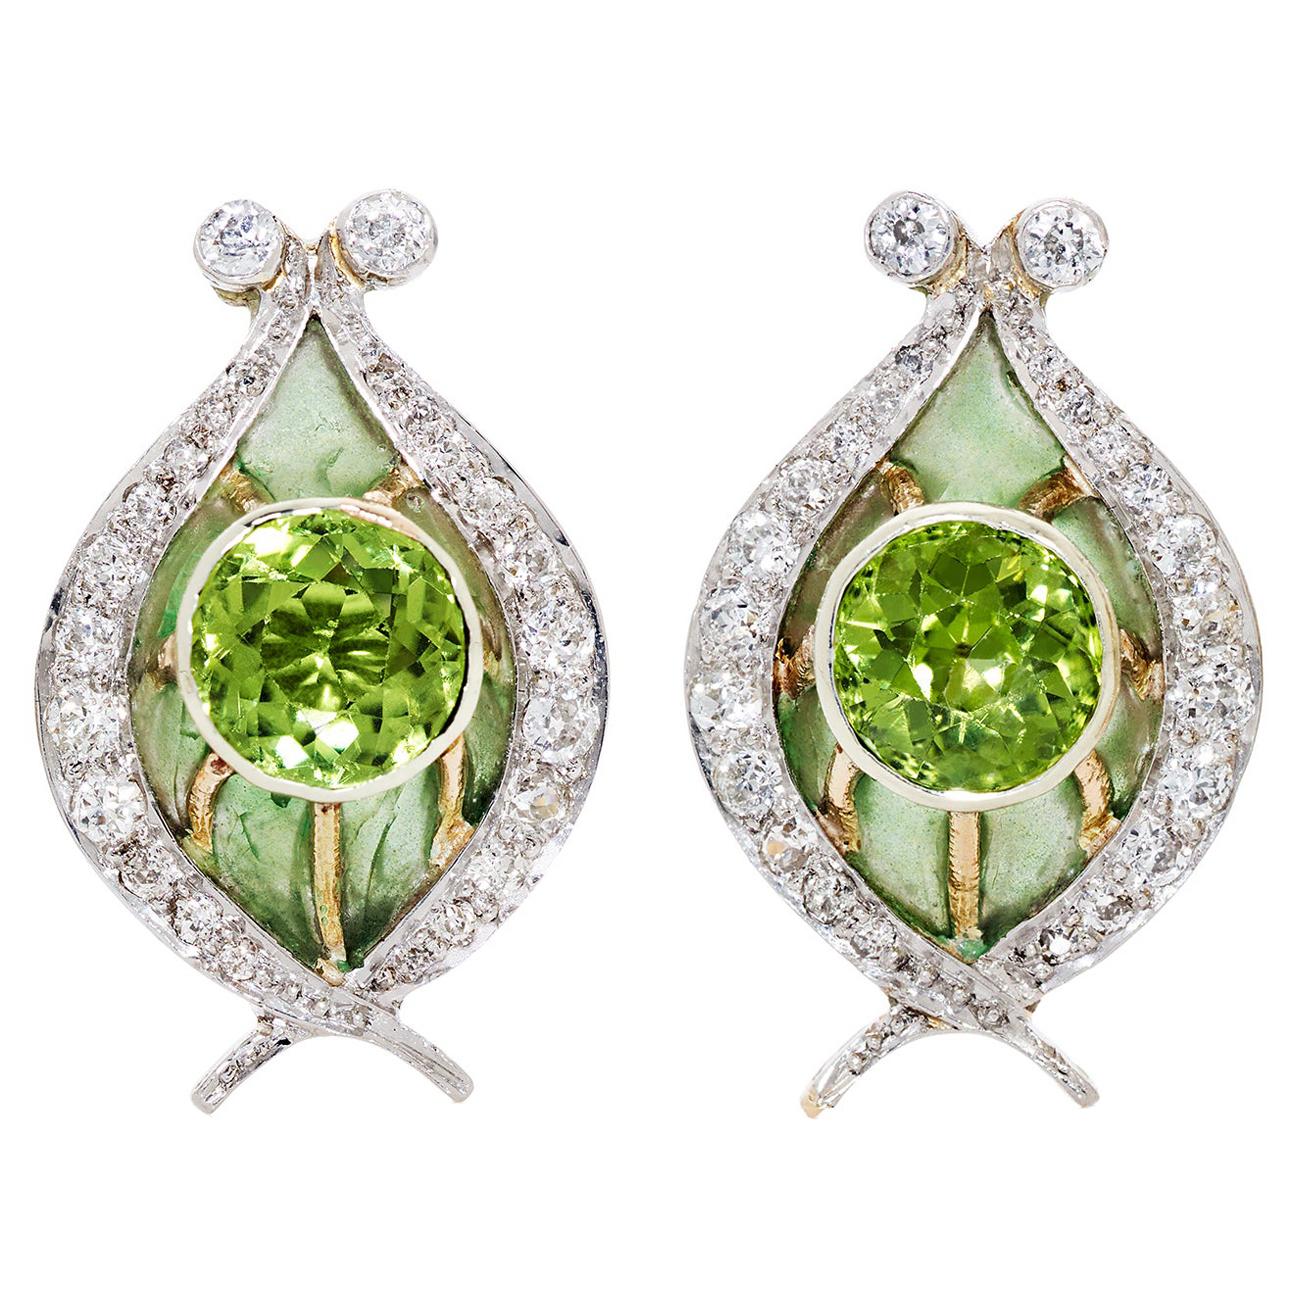 4.04 Carats Round Peridot and Diamond Plique a Jour Earrings in Platinum and 14K